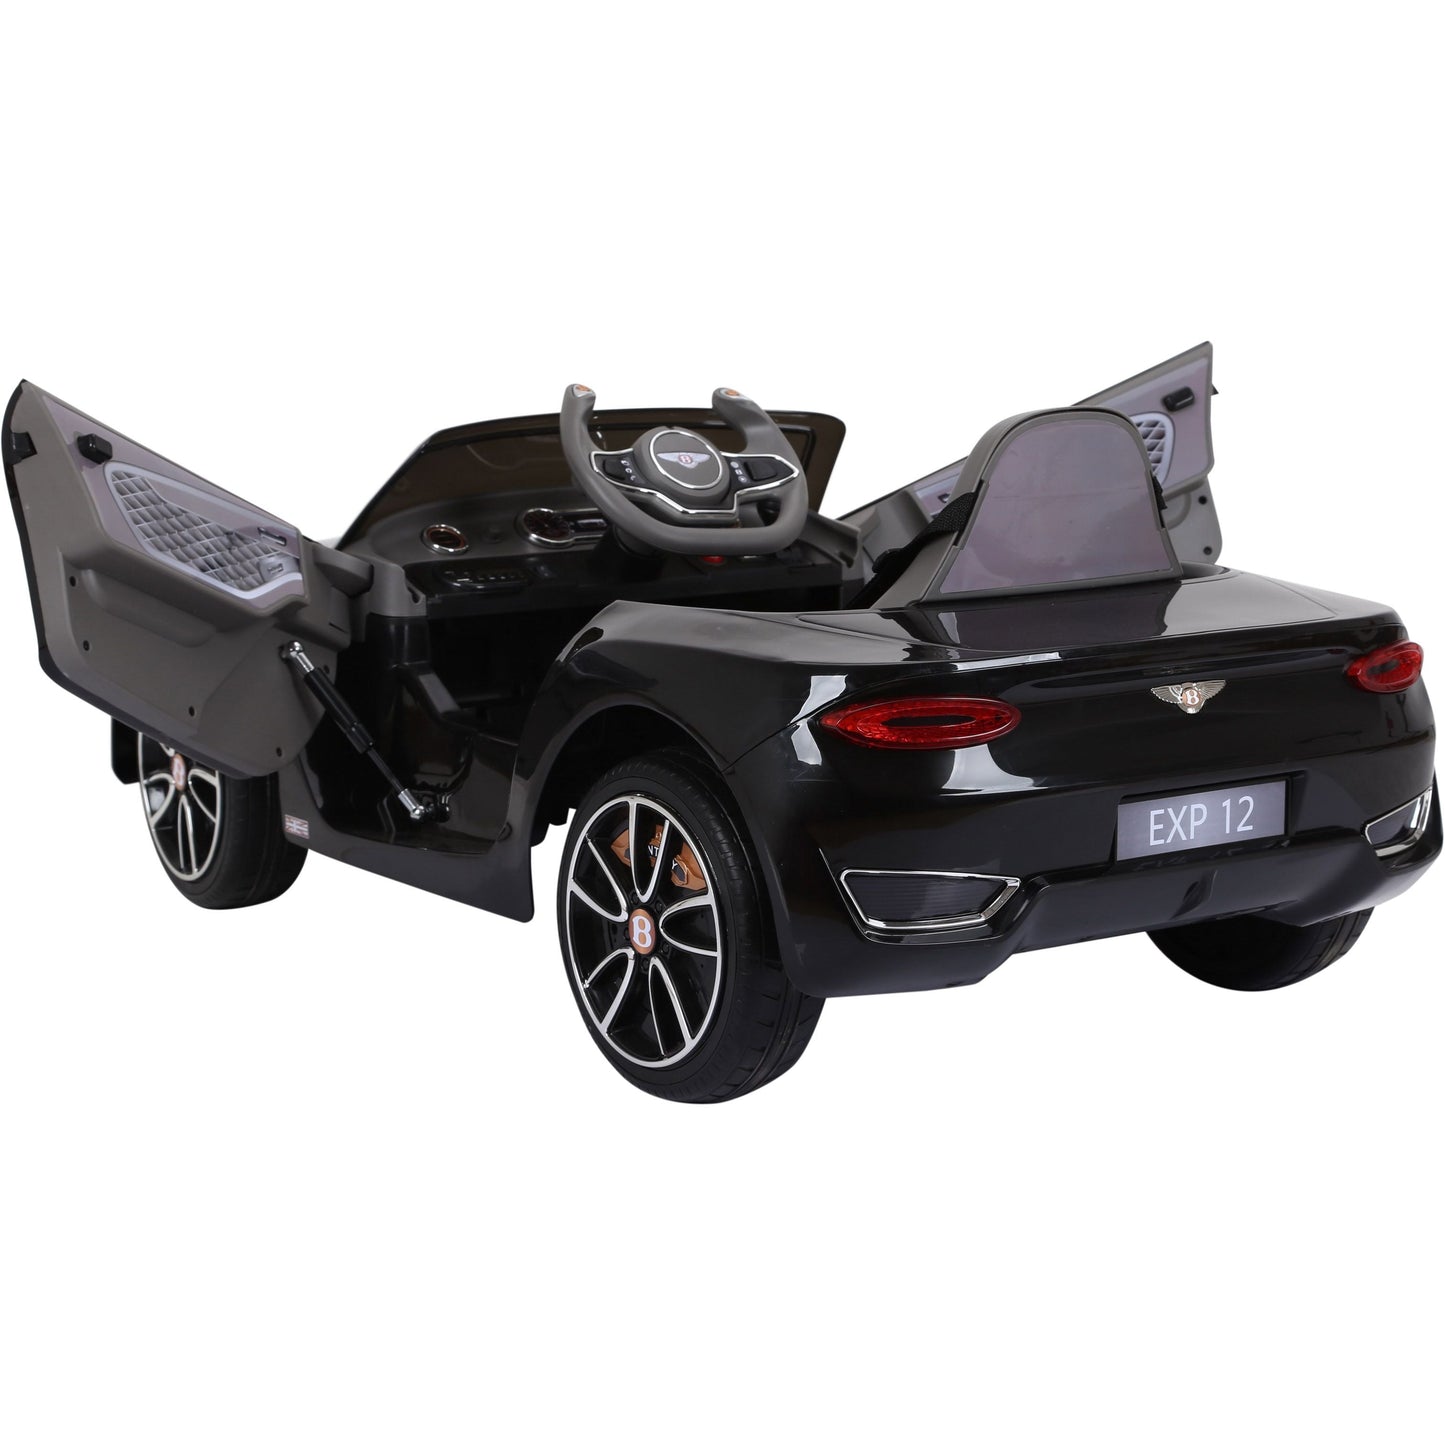 Black Bentley GT EXP12 Electric Ride On Toy Car for Kids with open doors